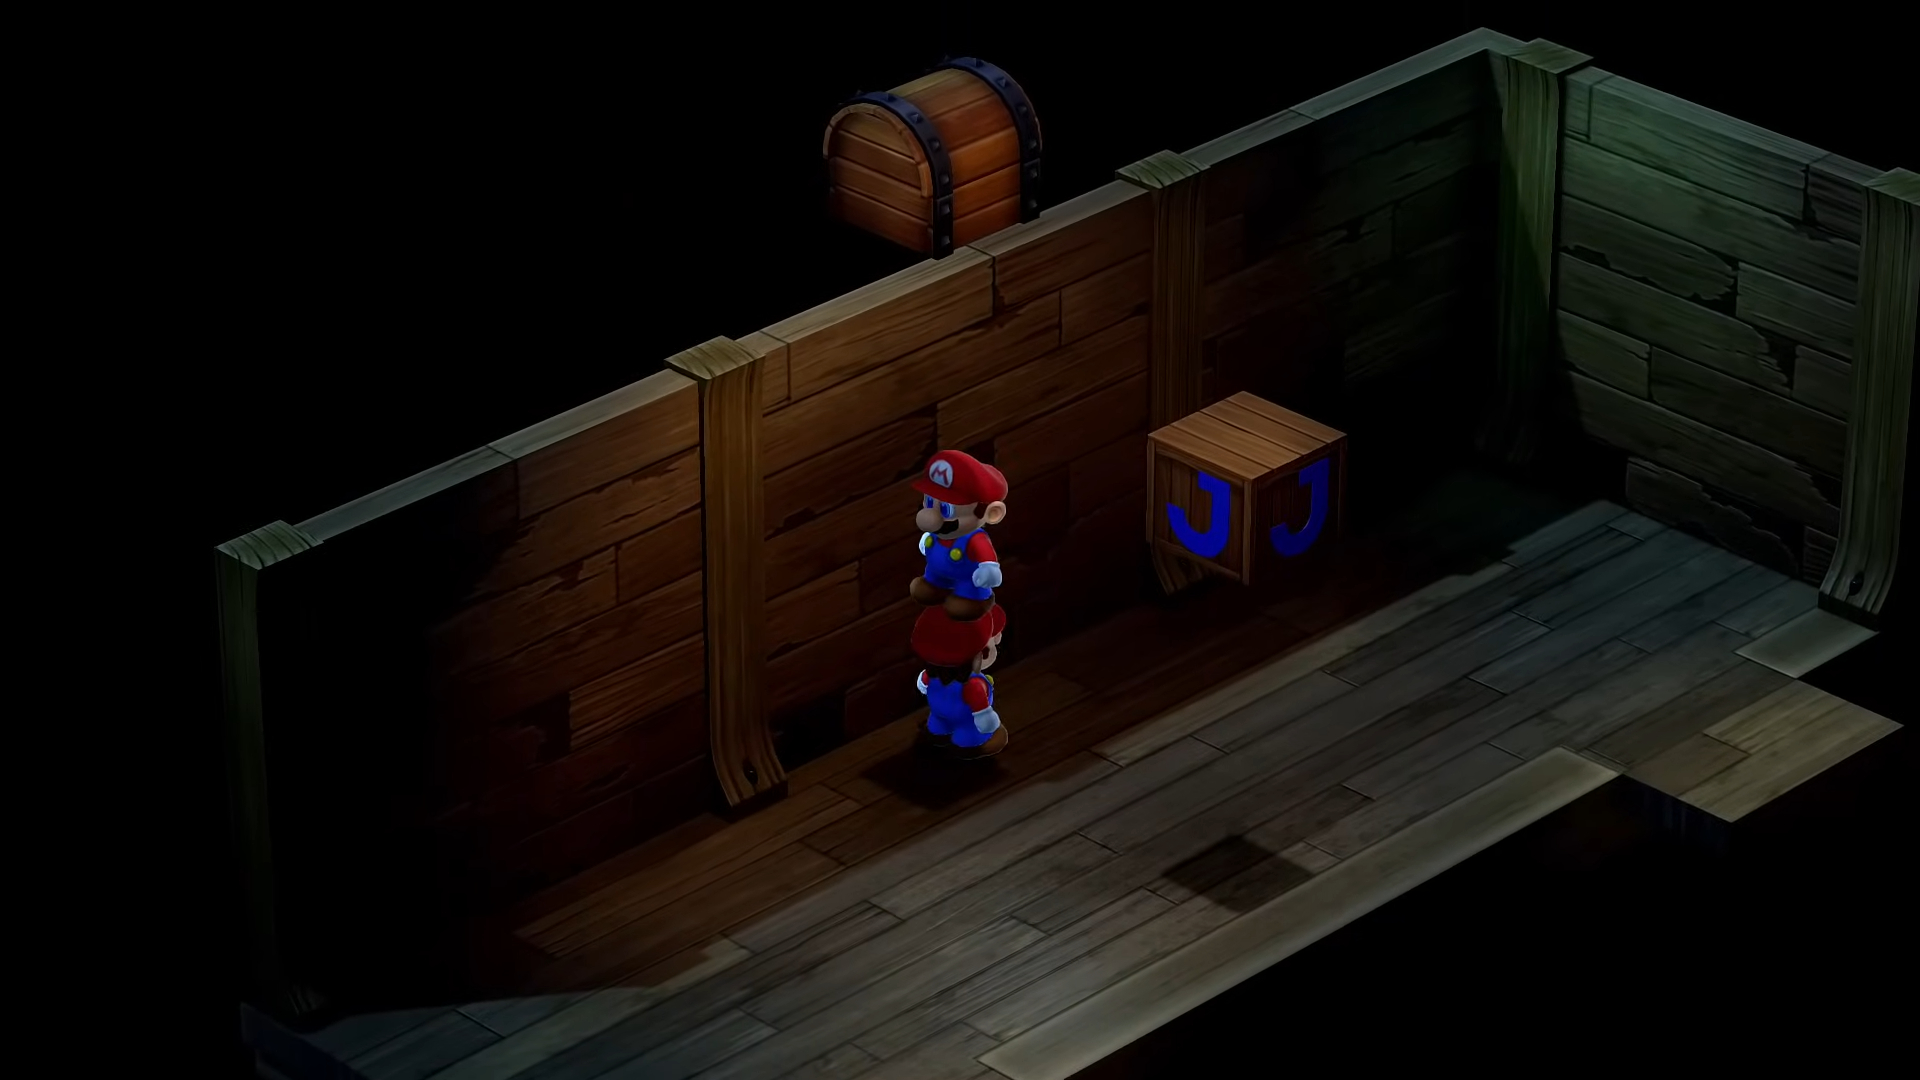 Mario standing on a clone's head.